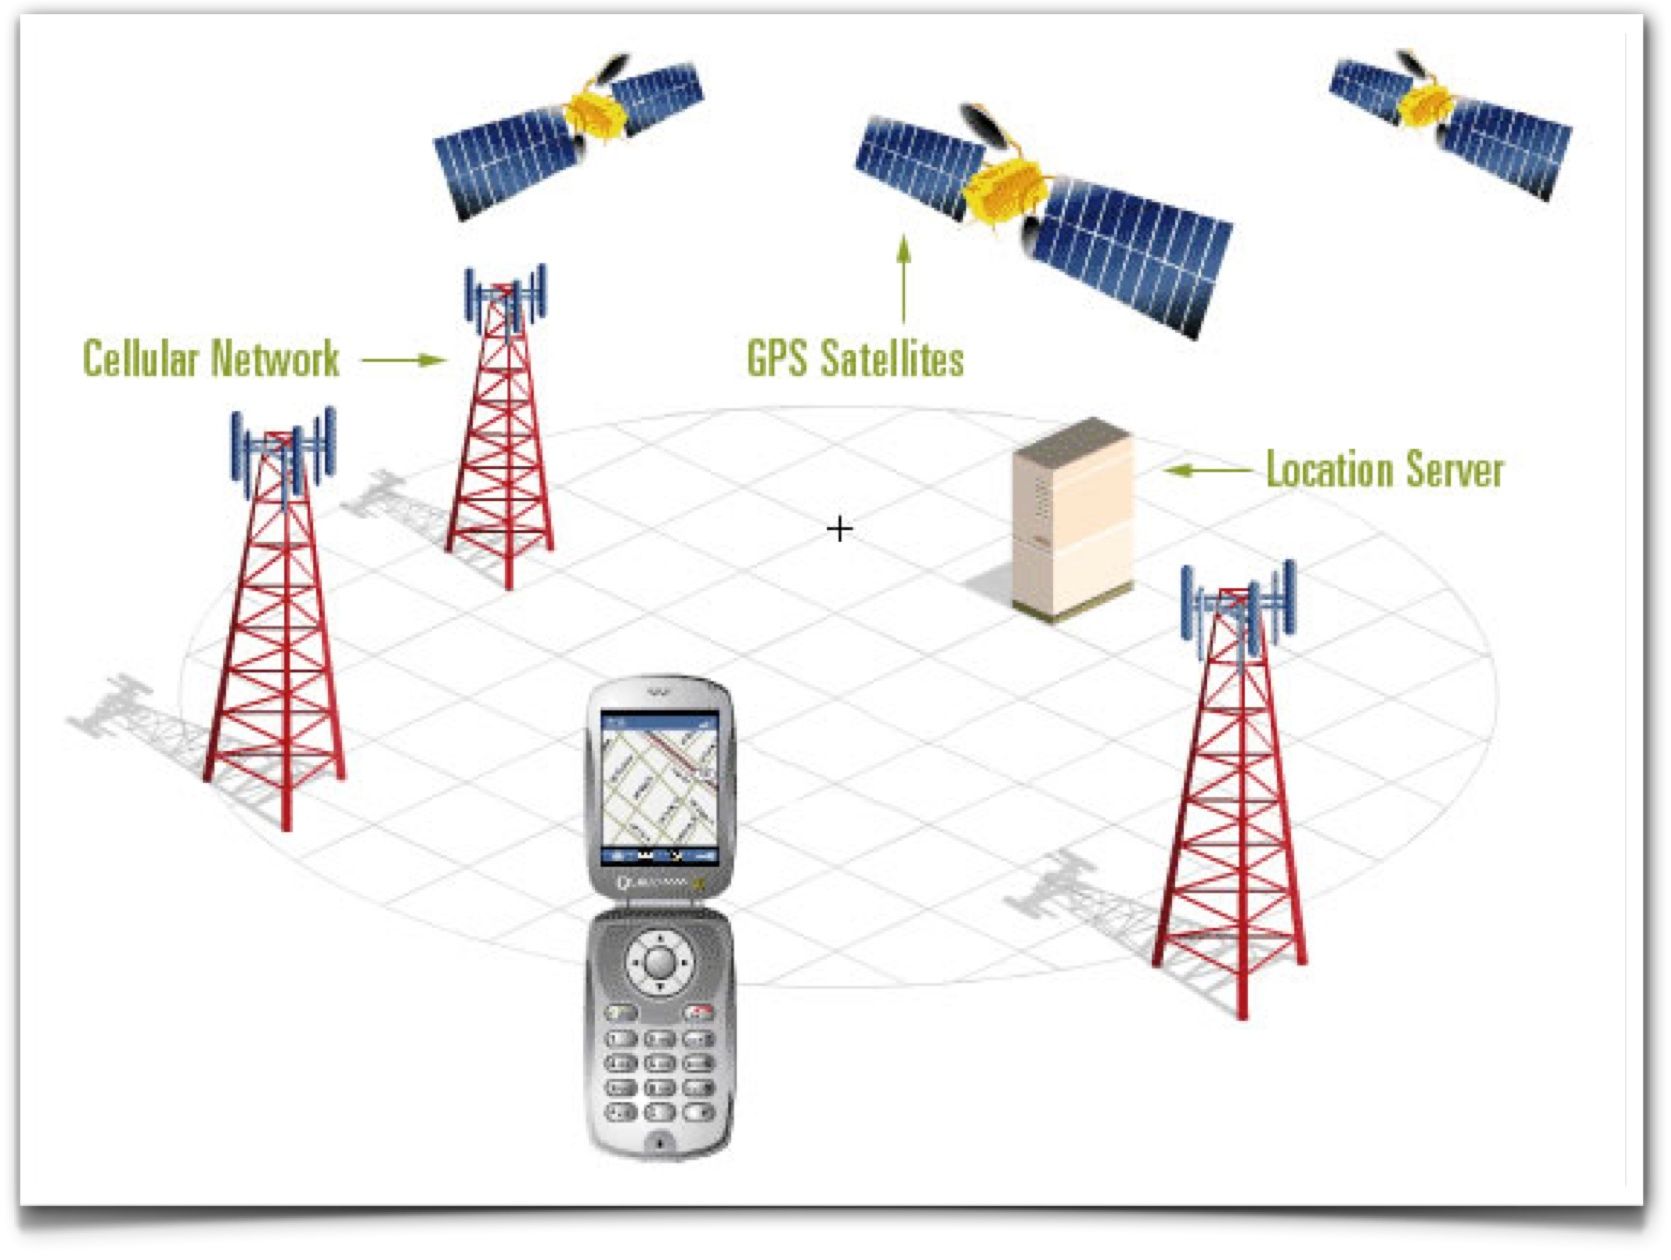 [YS Learn] LBS building blocks: Global Positioning System (GPS)